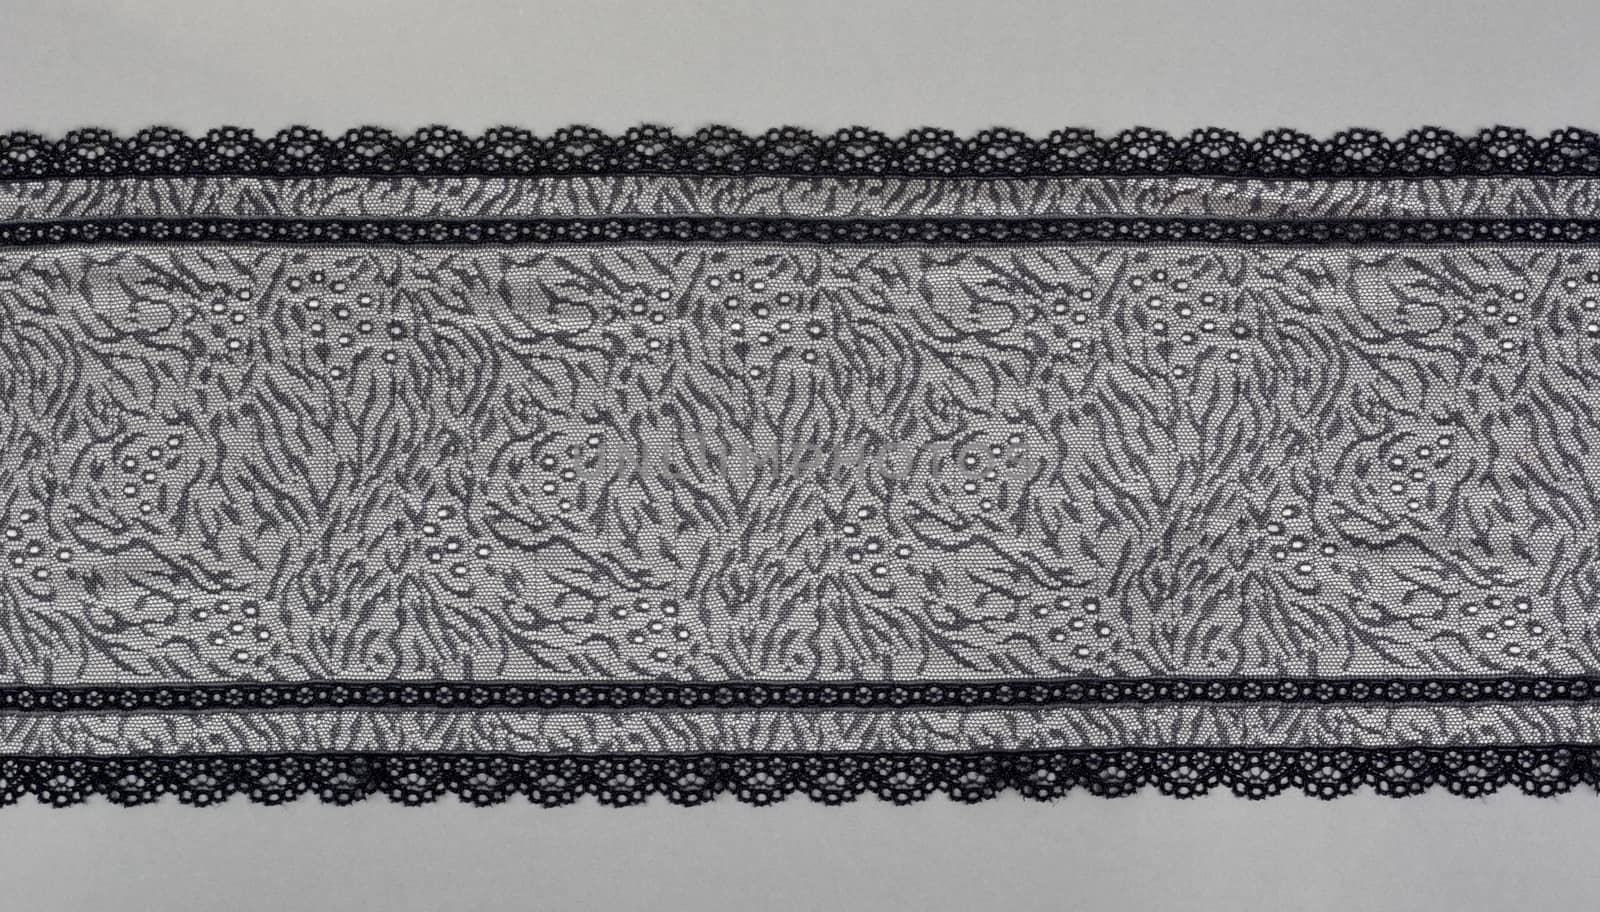 black gray color straight strip of lace fabric on gray background. Elastic silk nylon braid border. use clothes linen decoration. repeating pattern and interweaving threads. texture for websites